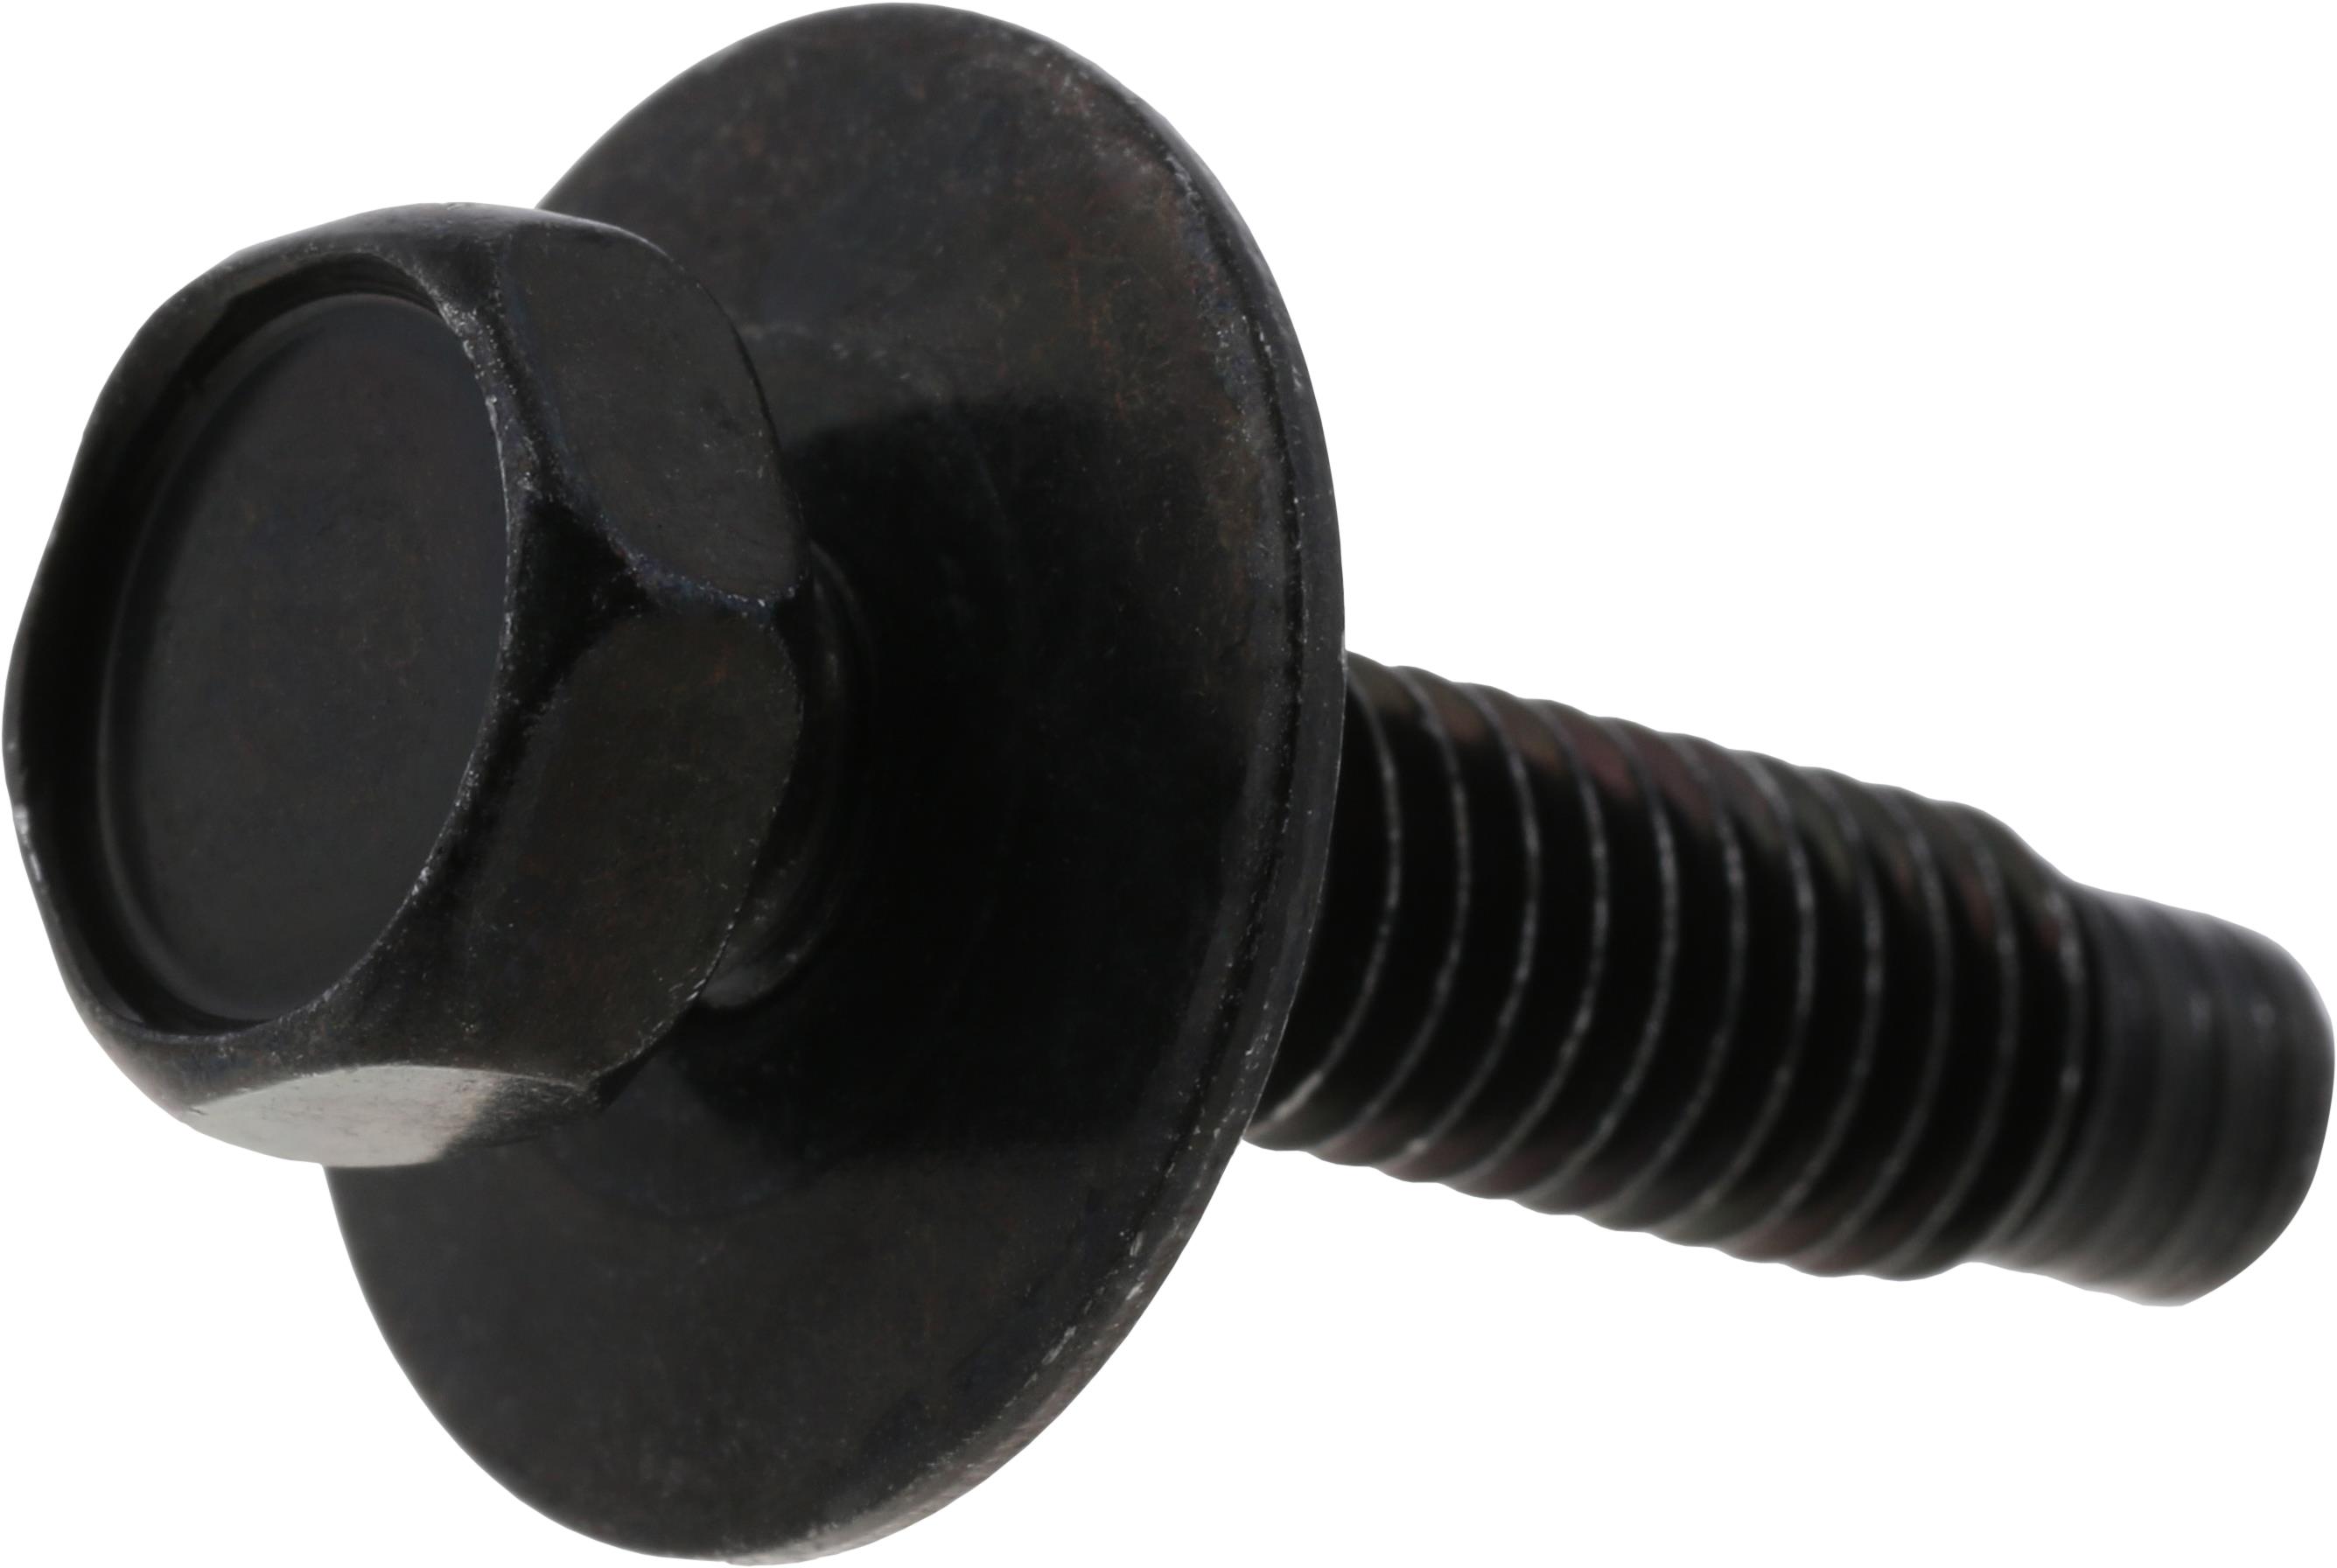 01121-N6051 - Screw. Wheel Well Liner Bolt. SUV, System, FITTING 